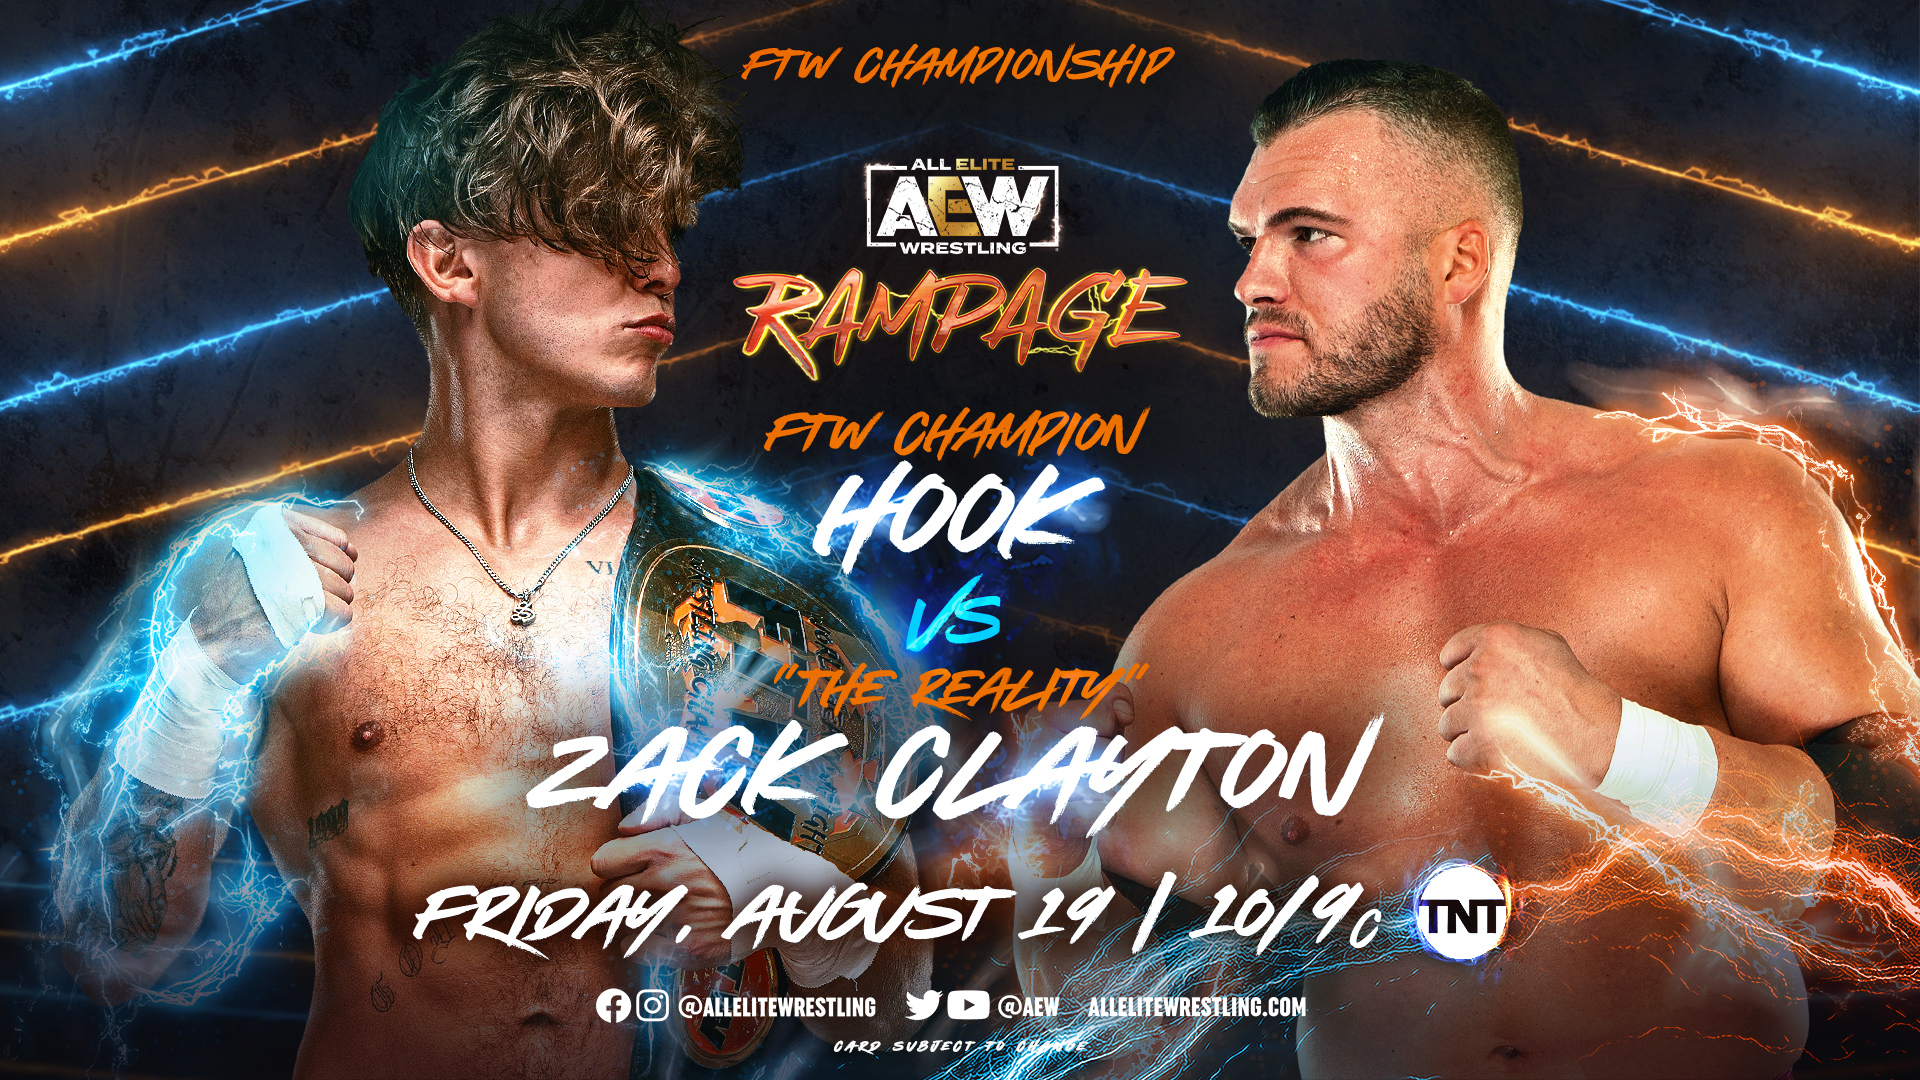 All Elite Wrestling on X: #FTW Champ @730hook issued an open challenge for  the FTW Championship on #AEWRampage, and @JerseyShore's @zackclayton  answered the challenge with plans on making his dream of becoming